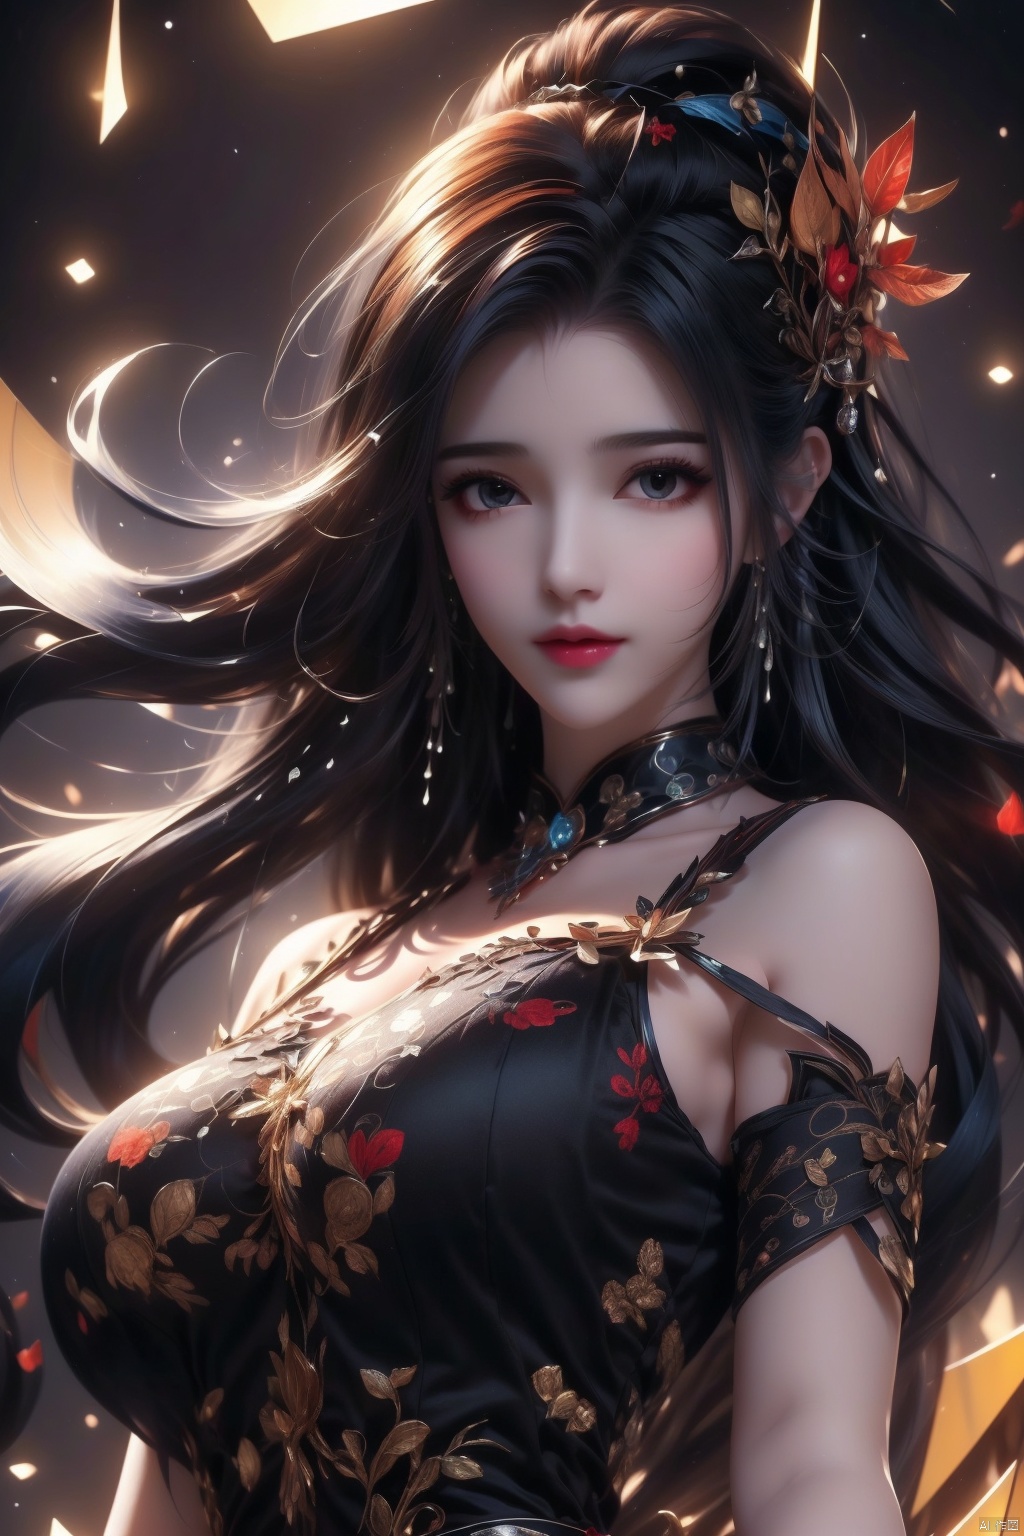  dark theme,zhongfenghua, (1girl:1.2), (masterpiece,top quality,best quality,official art,beautiful and aesthetic:1.2), (geometric abstract background:1.4), esoteric,depth of field(zentangle, mandala, tangle, entangle), (colorful:1.1), (floating colorful sparkles), (dynamic pose), (dynamic angle:1.4), glowing skin,elegant, a brutalist designed, vivid colours, romanticism, Samoan pond, Fluid Moving well-built girl, Fall, expressive brush strokes, Swirling, Daofa Rune, 1girl,police,yellow_dress